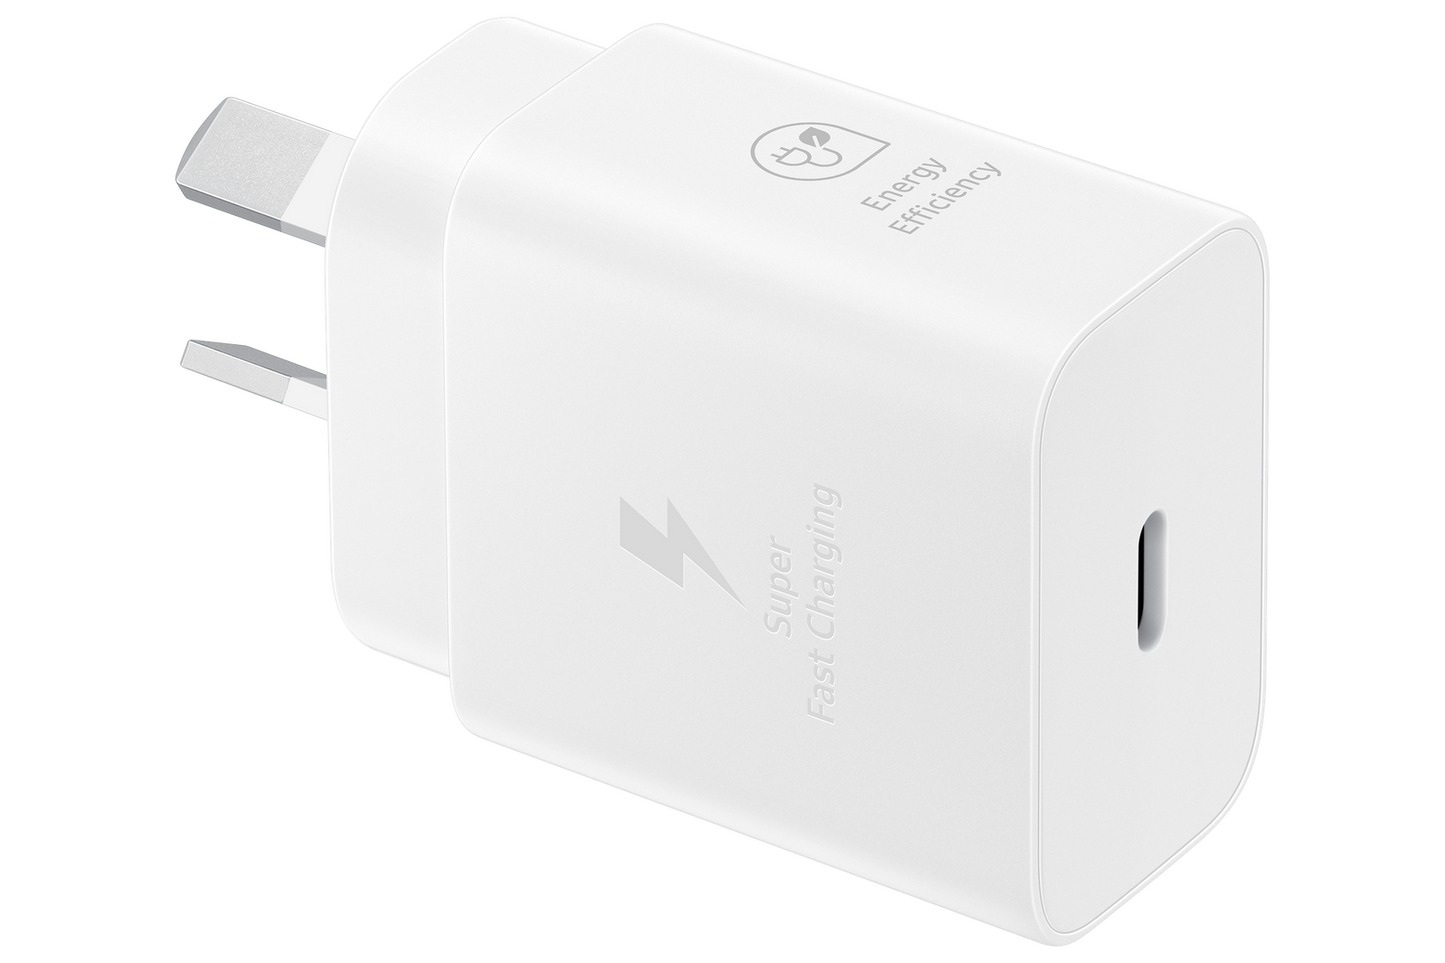 Genuine Samsung 25W USB Type C Super Fast Charger Wall Power Adapter - White